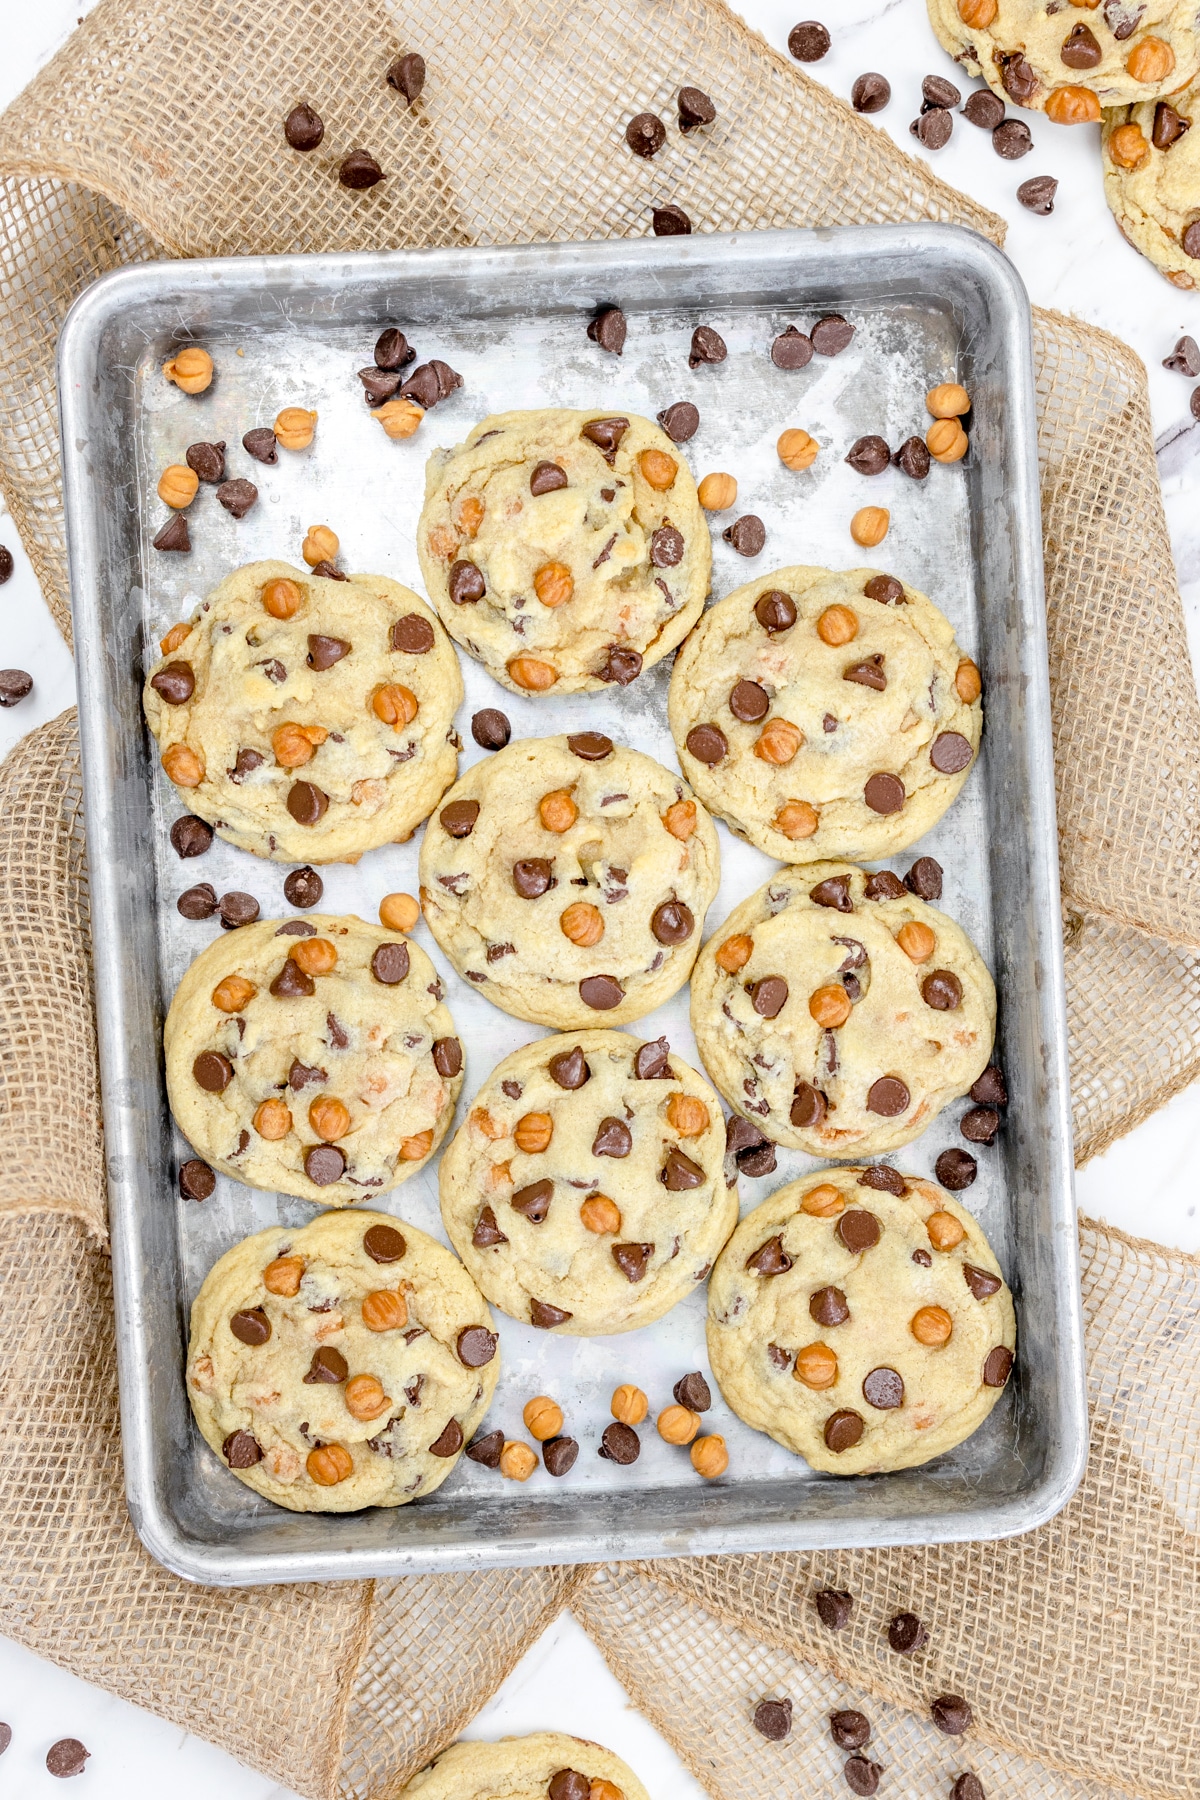 Top view of Caramel Chocolate Chip Cookies on a baking sheet with more chocoalte and caramel chips around them.